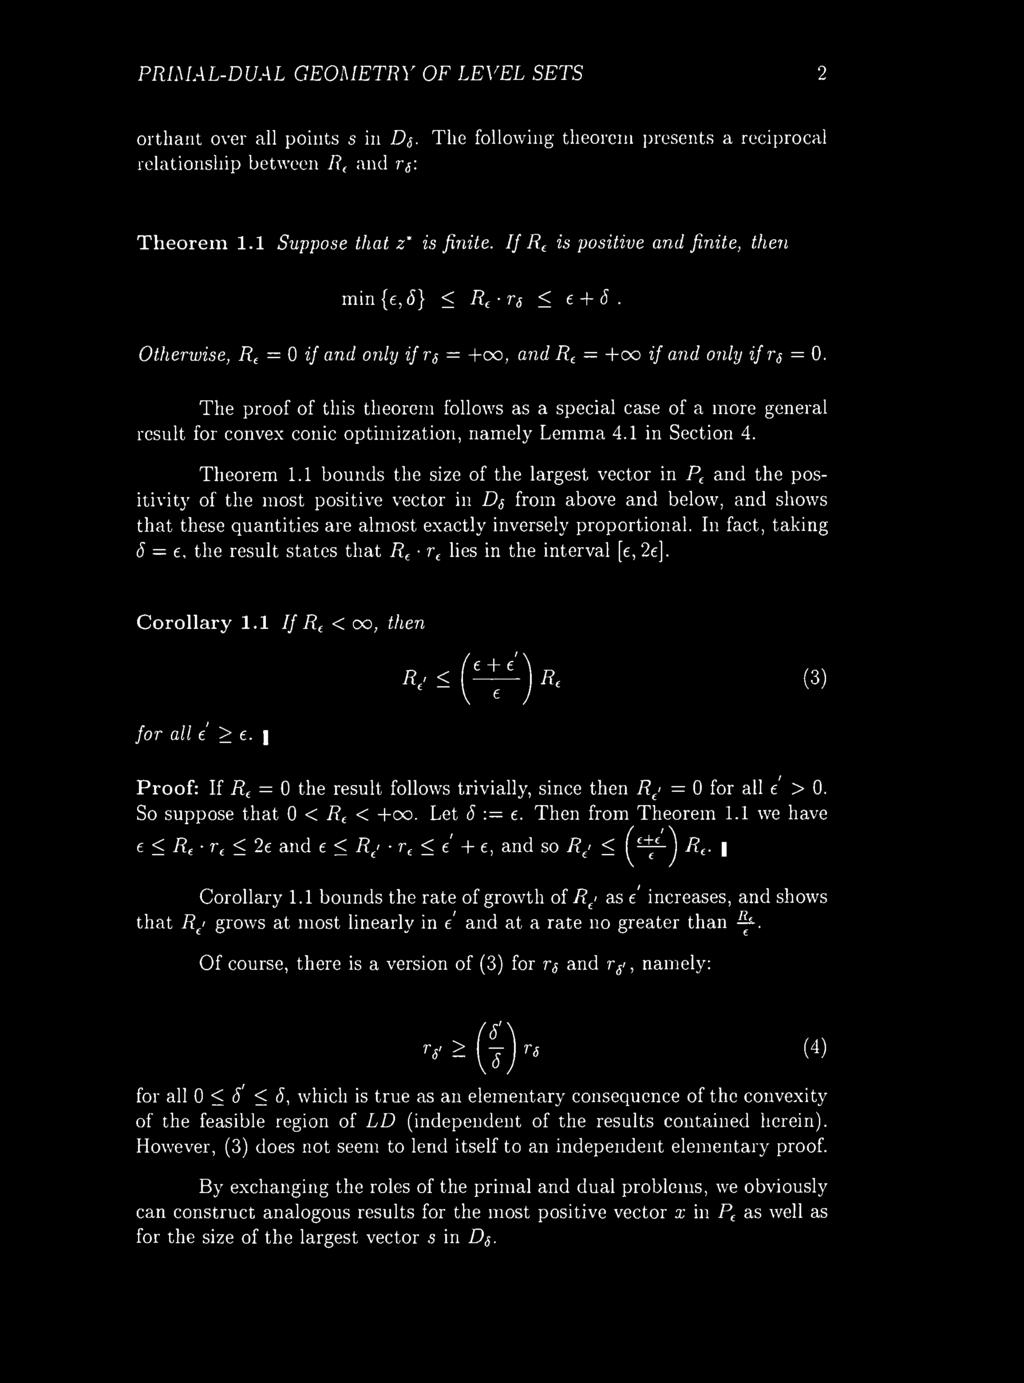 The proof of this theorem follows as a special case of a more general result for convex conic optimization, namely Lemma 4.1 in Section 4. Theorem 1.